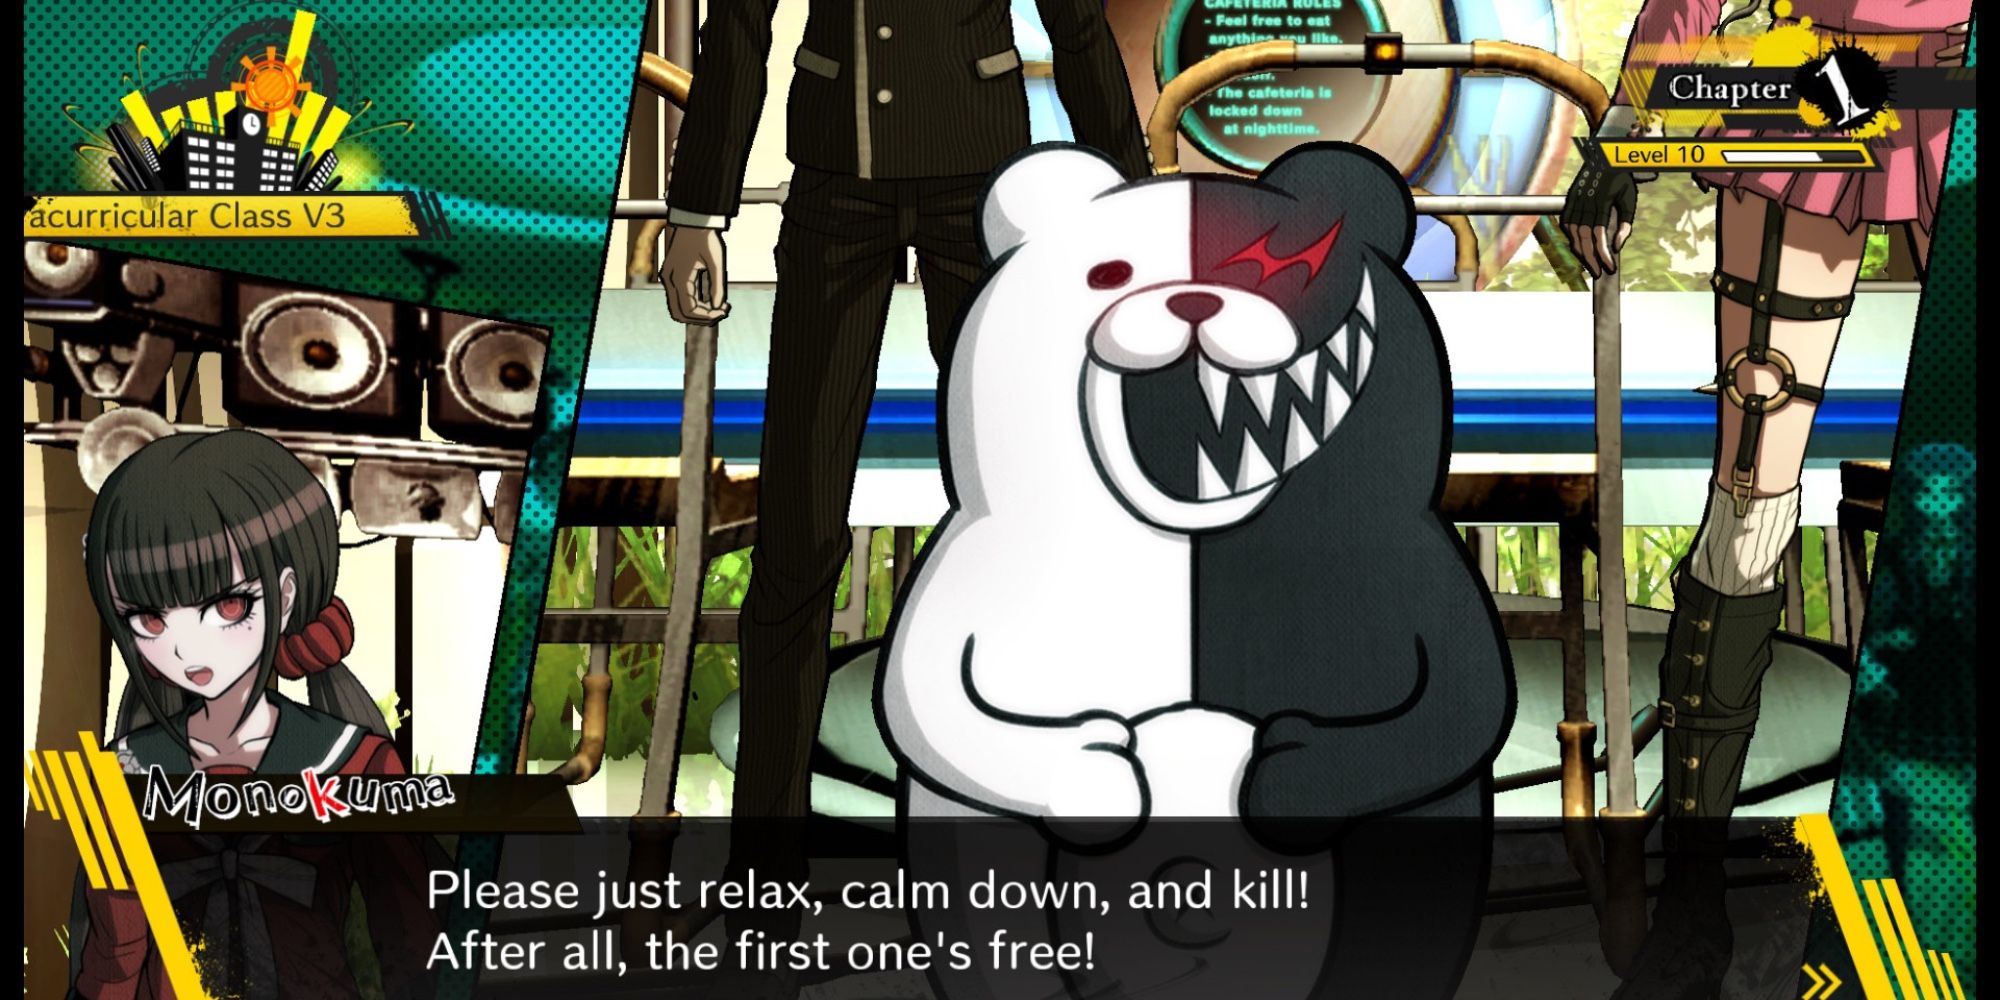 Underrated Visual Novels - Danganronpa V3 - Player interacts with characters in the game